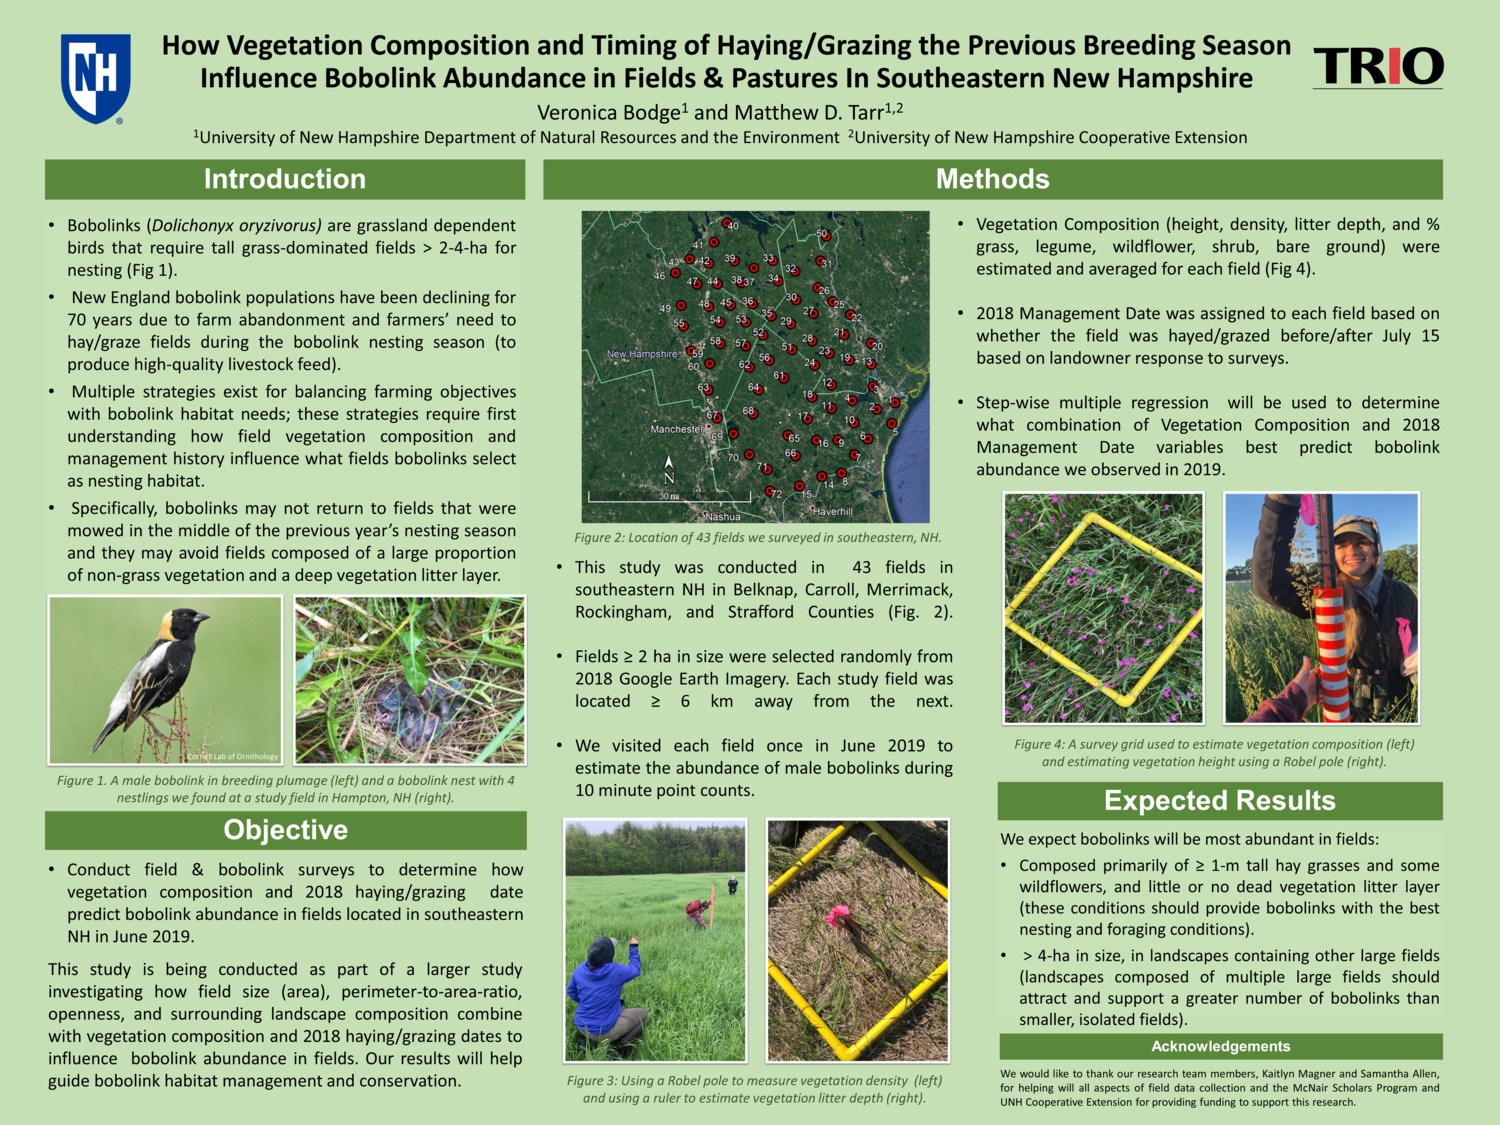 How Vegetation Composition And Timing Of Haying/Grazing The Previous Breeding Season Influence Bobolink Abundance In Fields & Pastures In Southeastern New Hampshire by vlb11